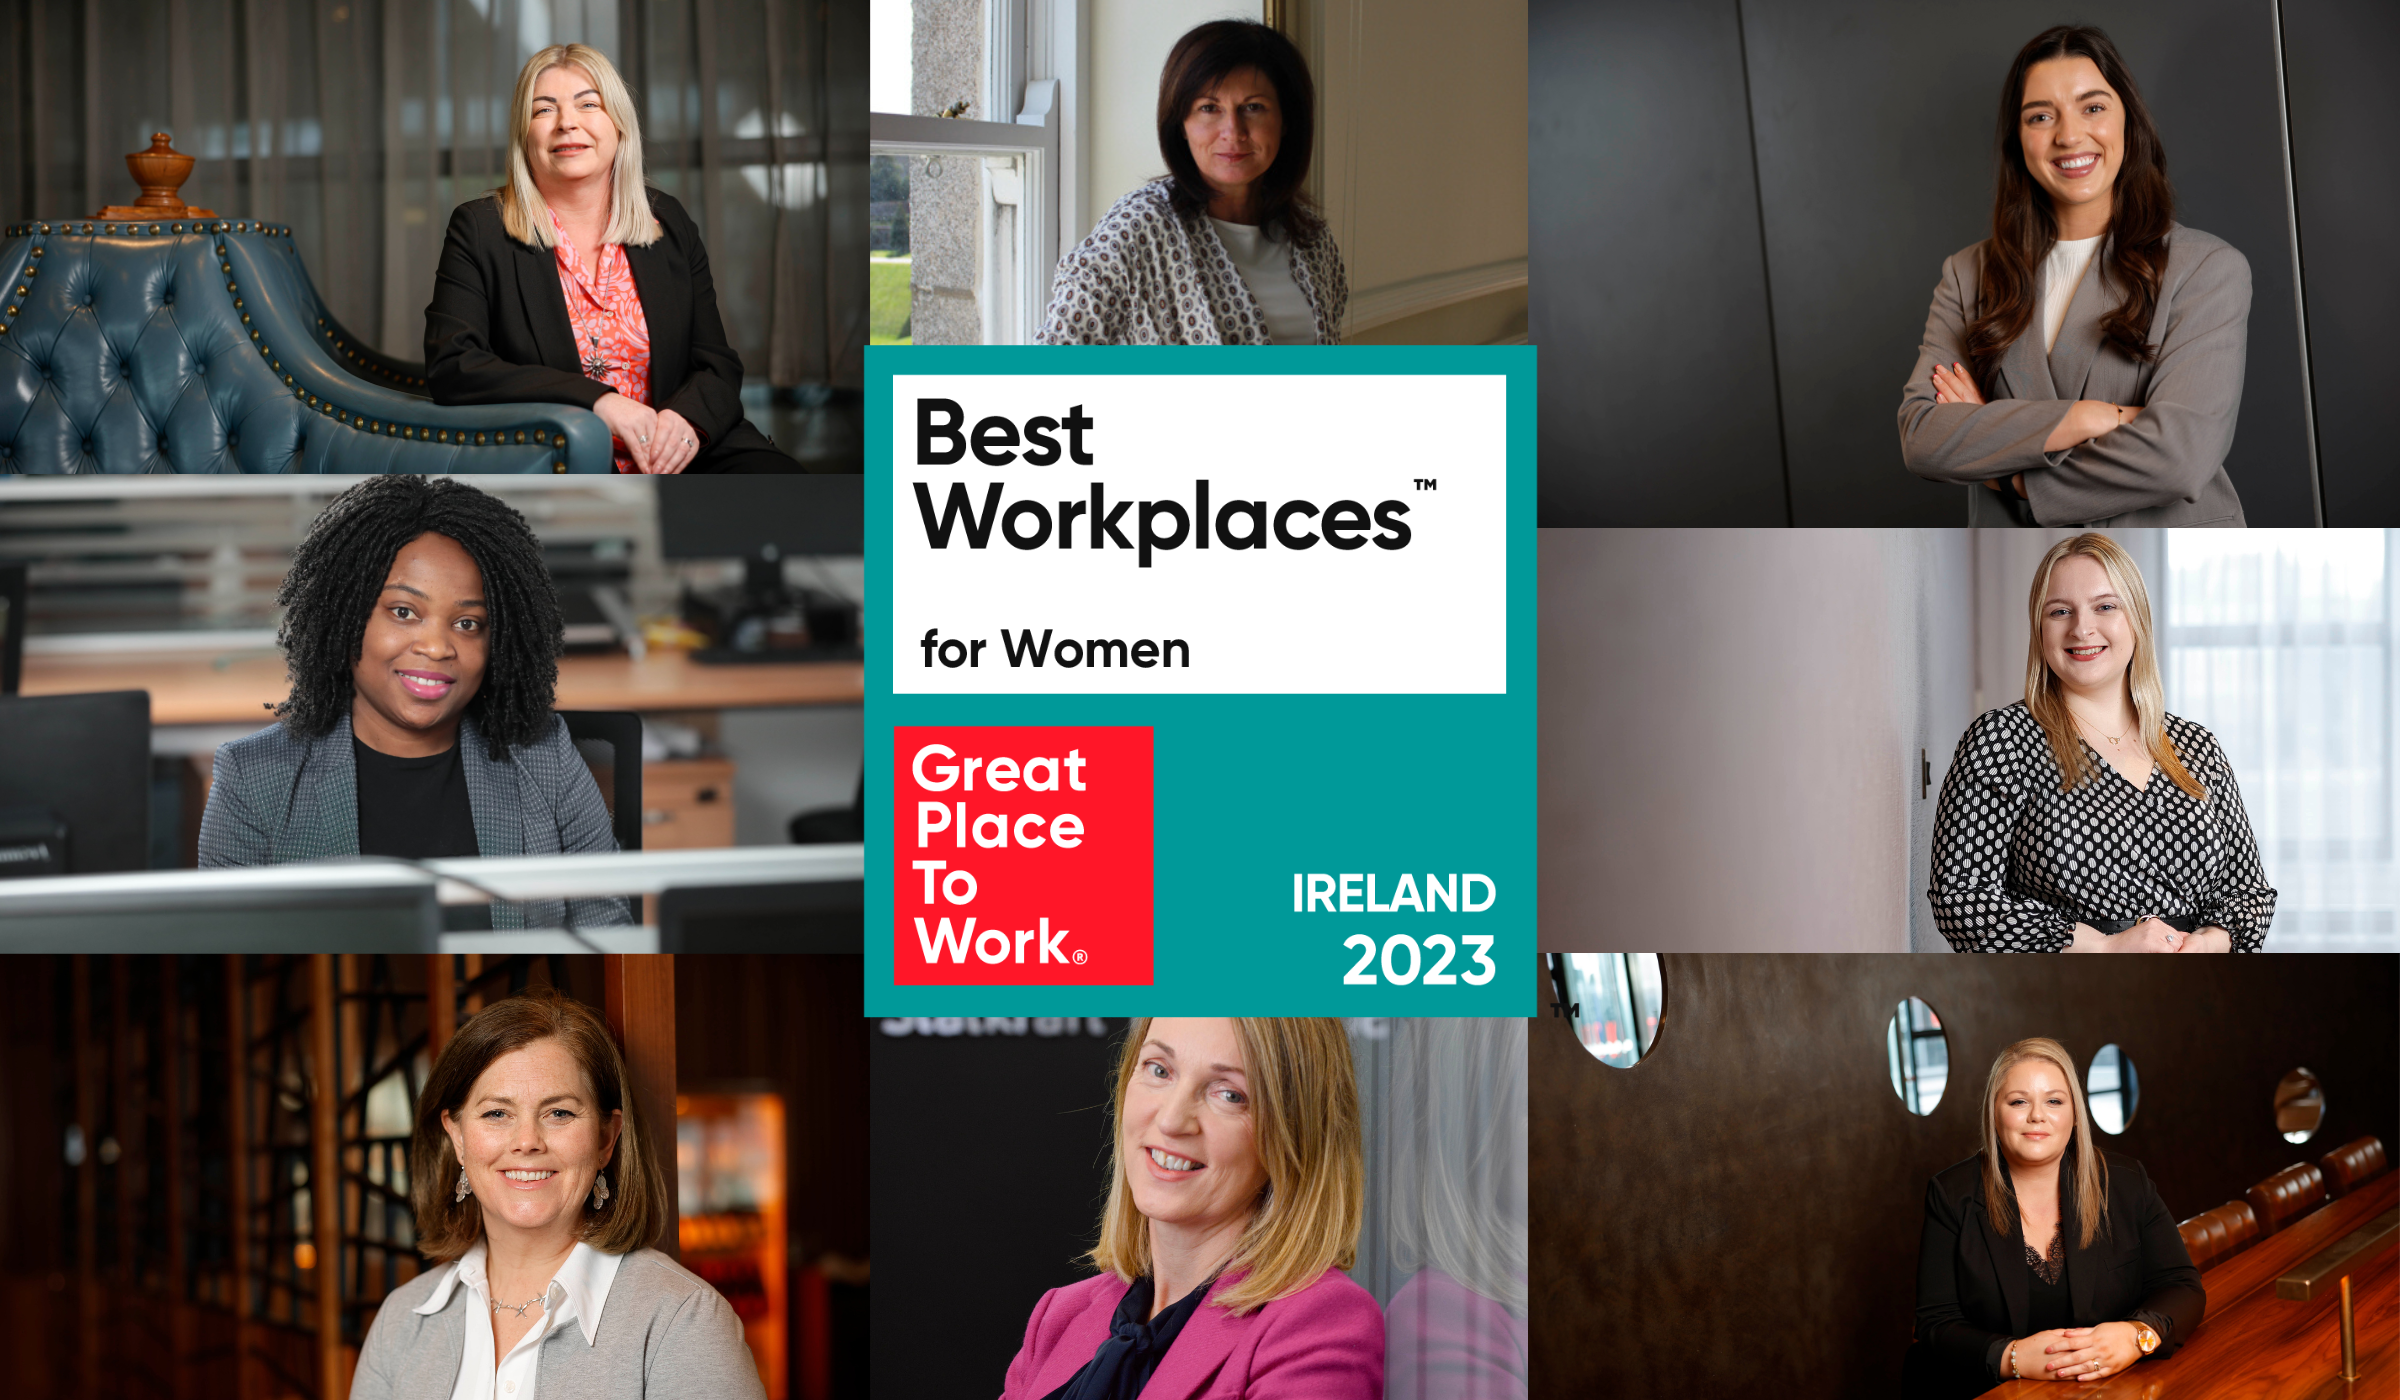 Unveiled: The Best Workplaces for Women™ 2023!